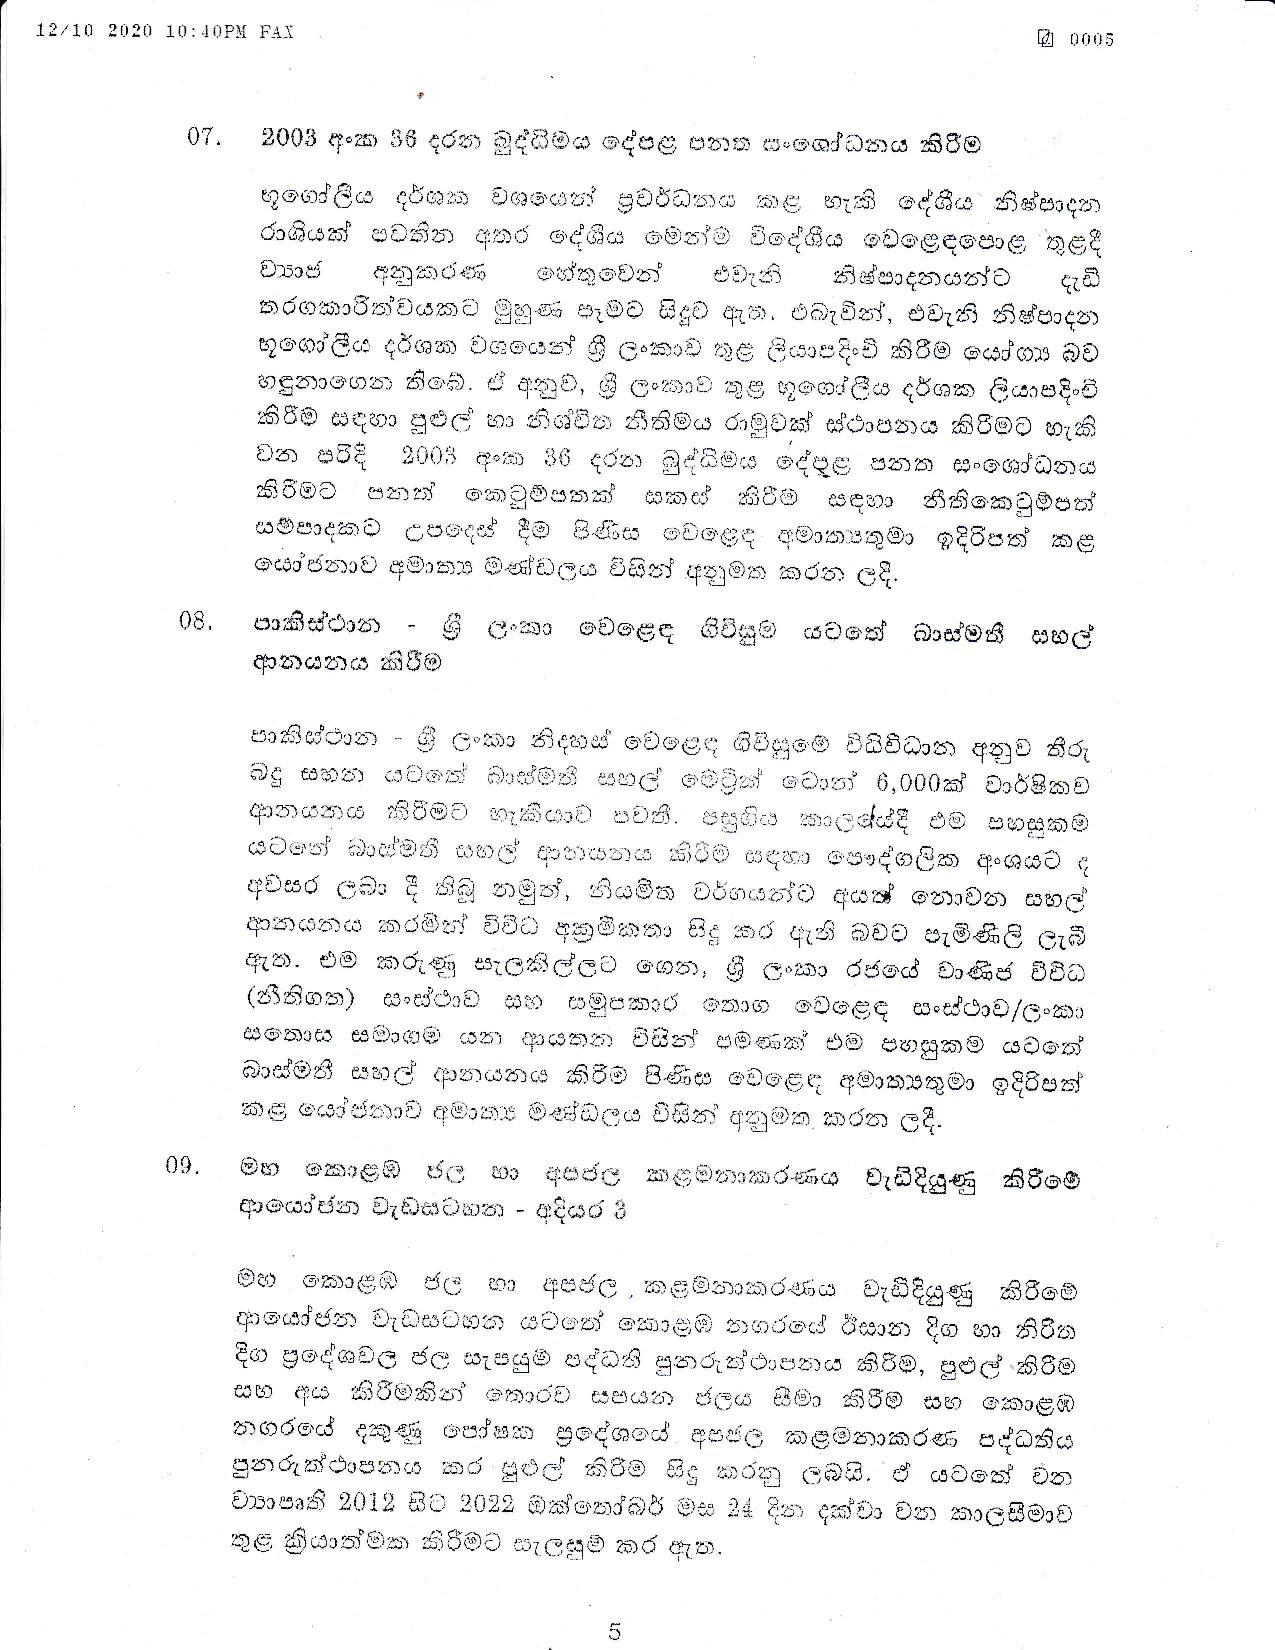 Cabinet Decision on 12.10.2020 page 005